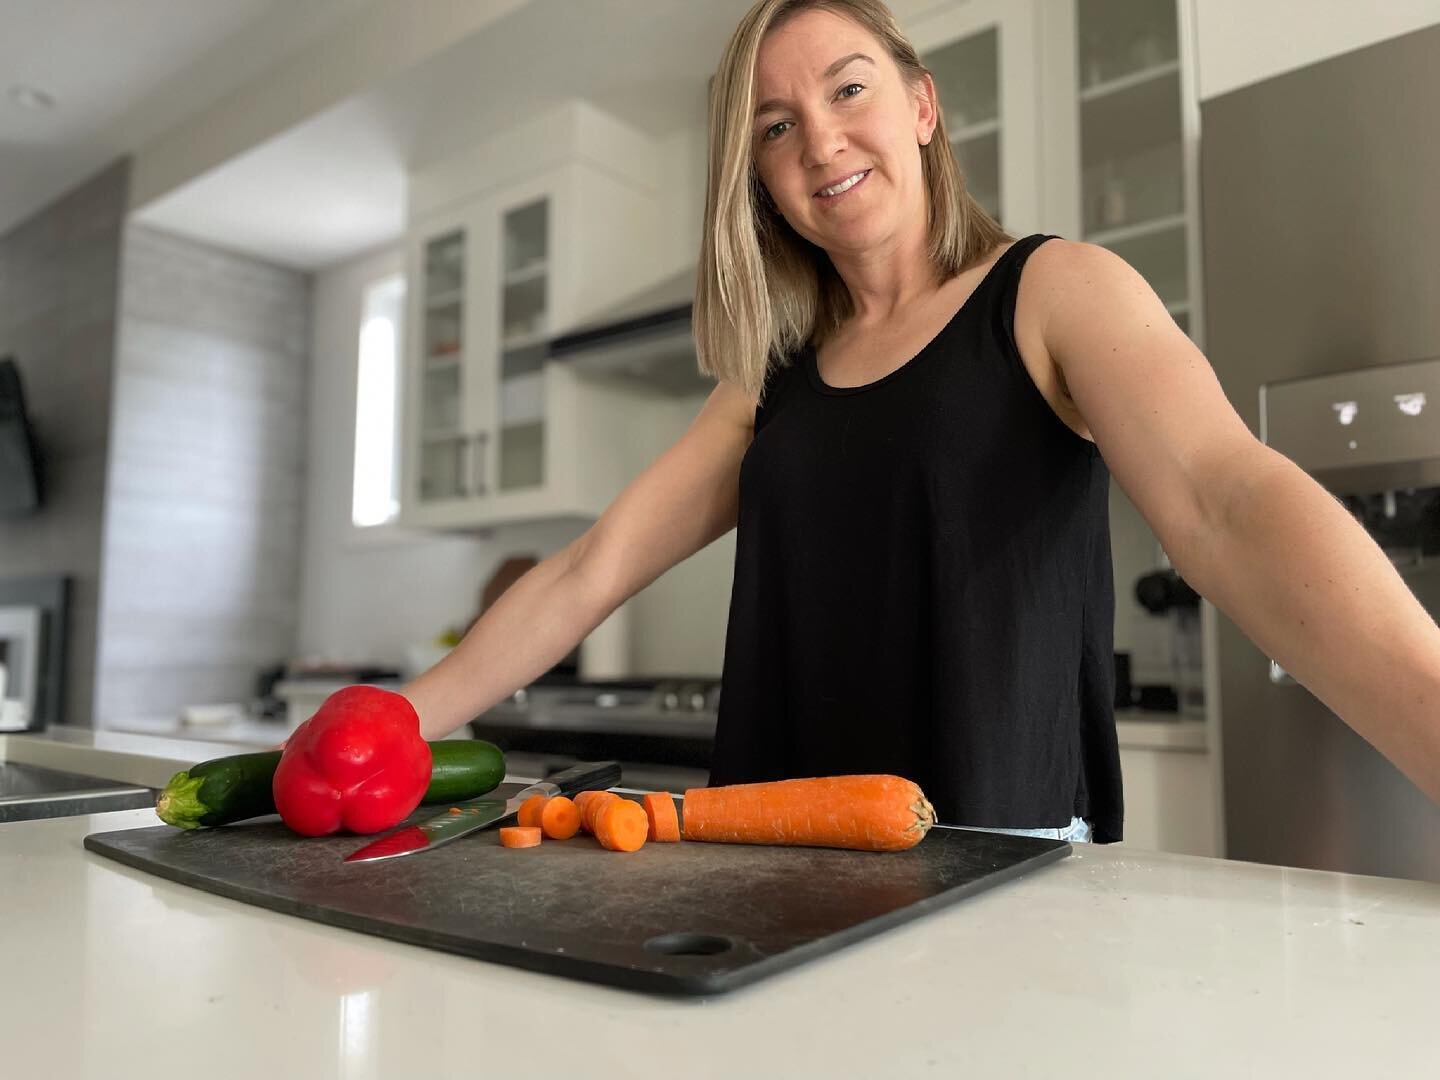 Nearly all of my Remote Coaching clients have shared stories with me about theirr struggles with their relationship with food and their attempts at maintaining consistency in fuelling their bodies to feel their best. I get it, there&rsquo;s a lot goi